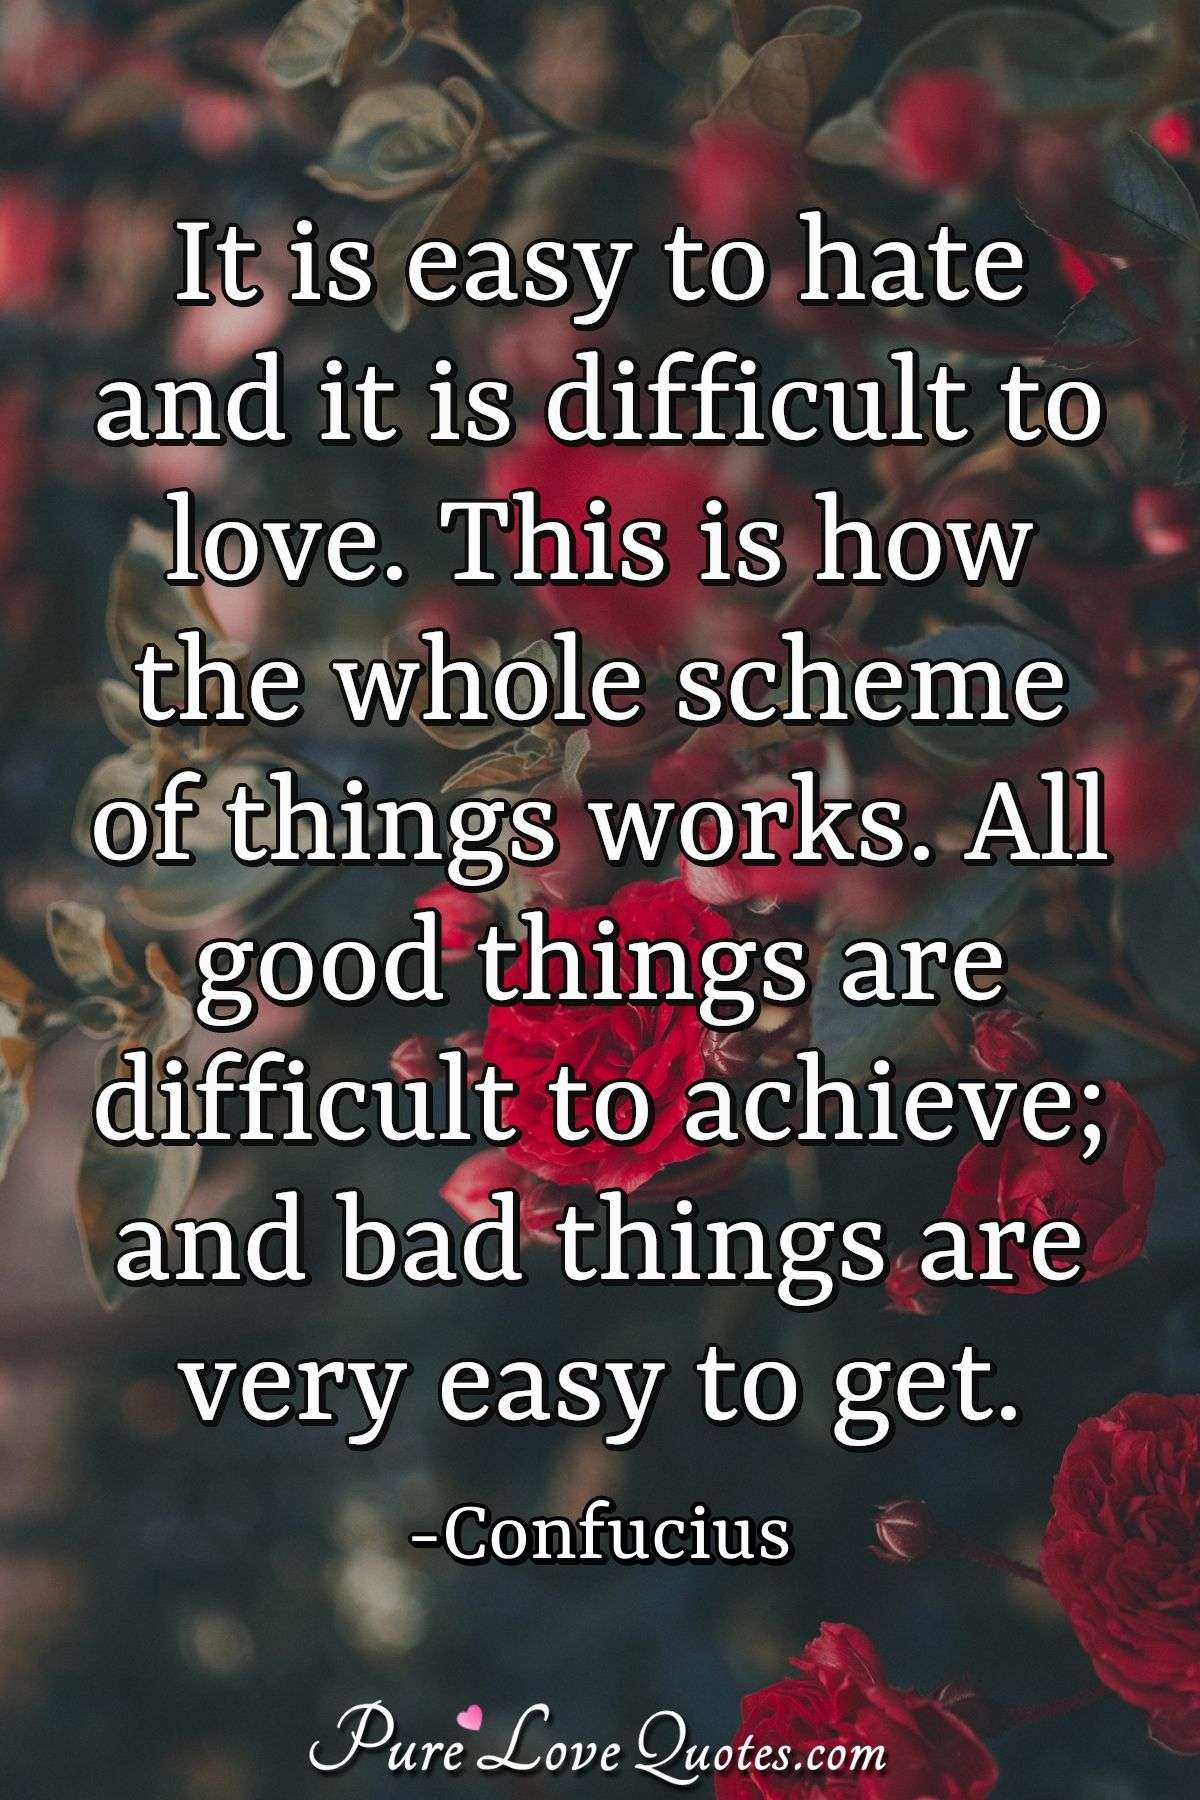 It is easy to hate and it is difficult to love. This is how the whole scheme of things works. All good things are difficult to achieve; and bad things are very easy to get. - Confucius